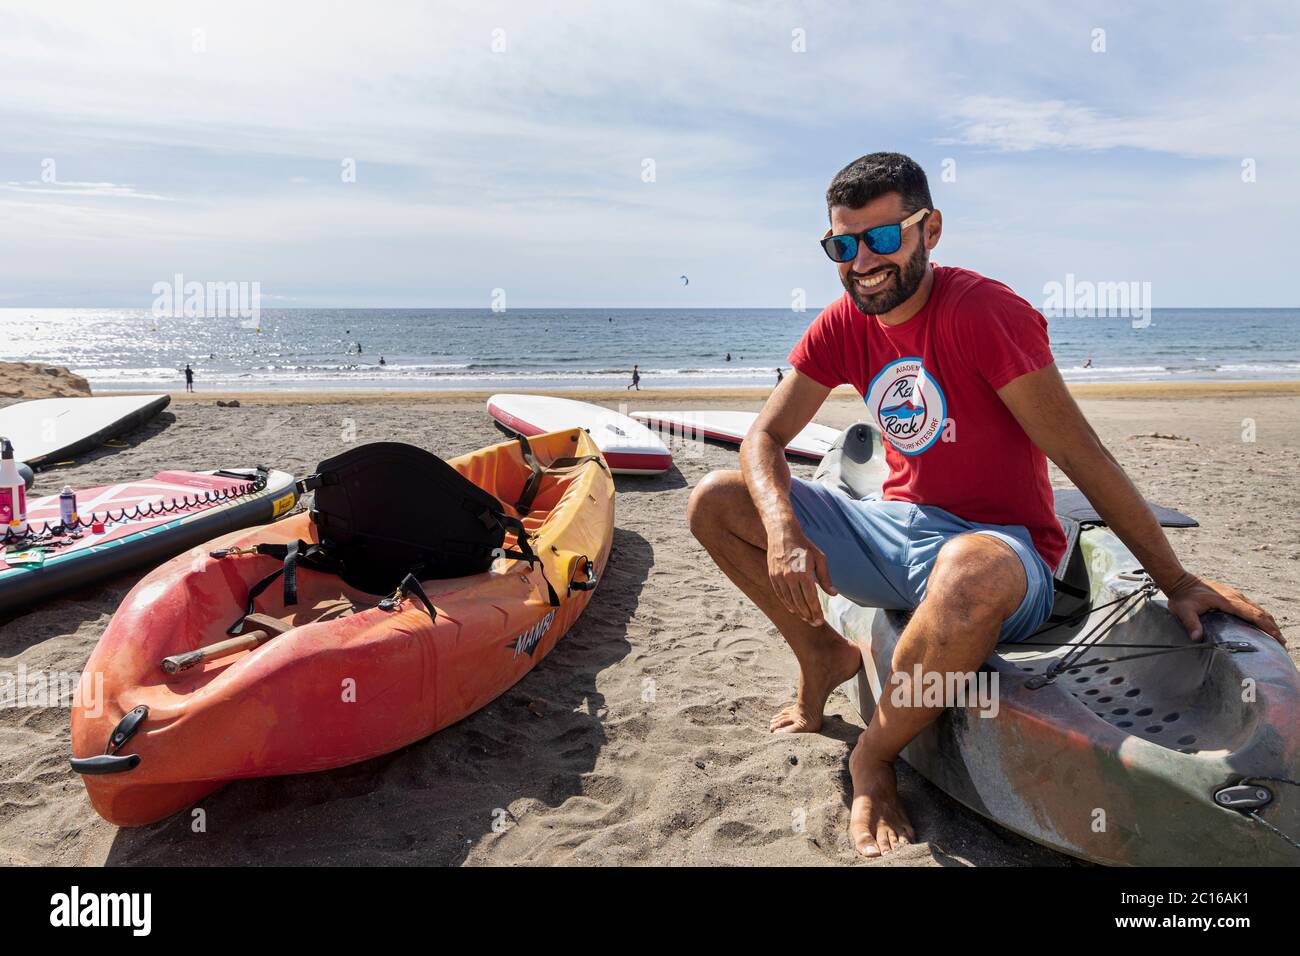 Local residents have the beach to themselves as the weather hots up for summer. Owner at Red Rock Surf prepares kayaks for hire. Phase 3 de-escalation Stock Photo